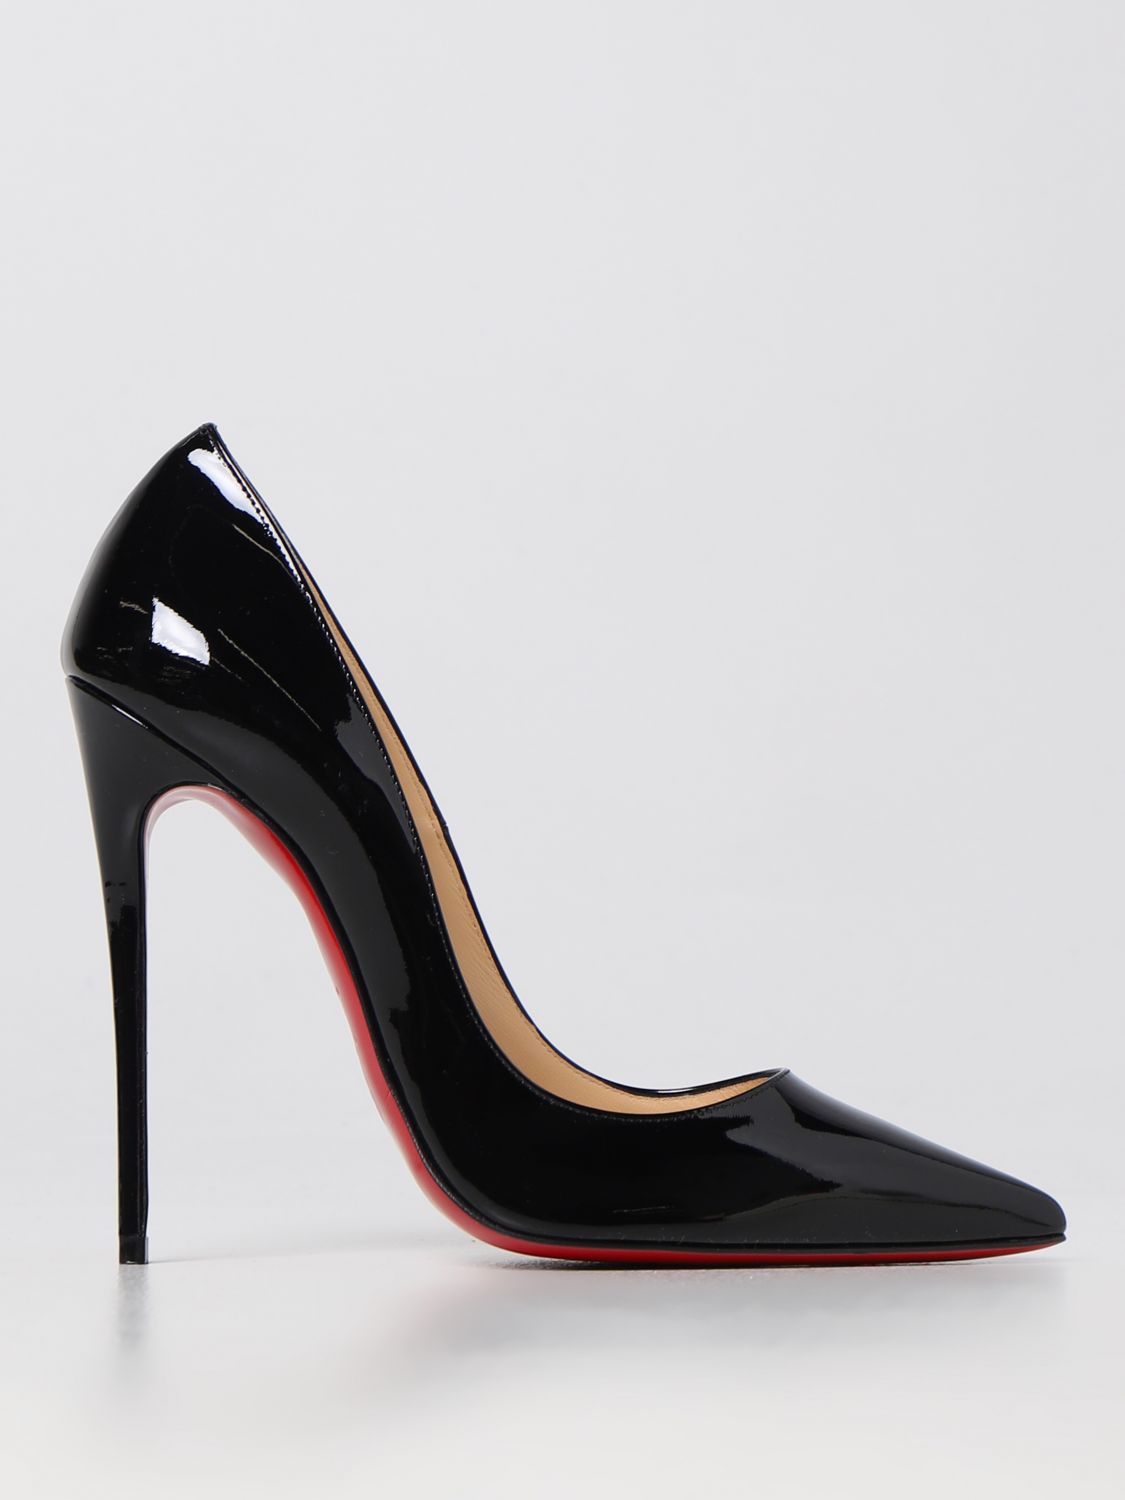 Sale Now On At Christian Louboutin Outlet Boutique UK